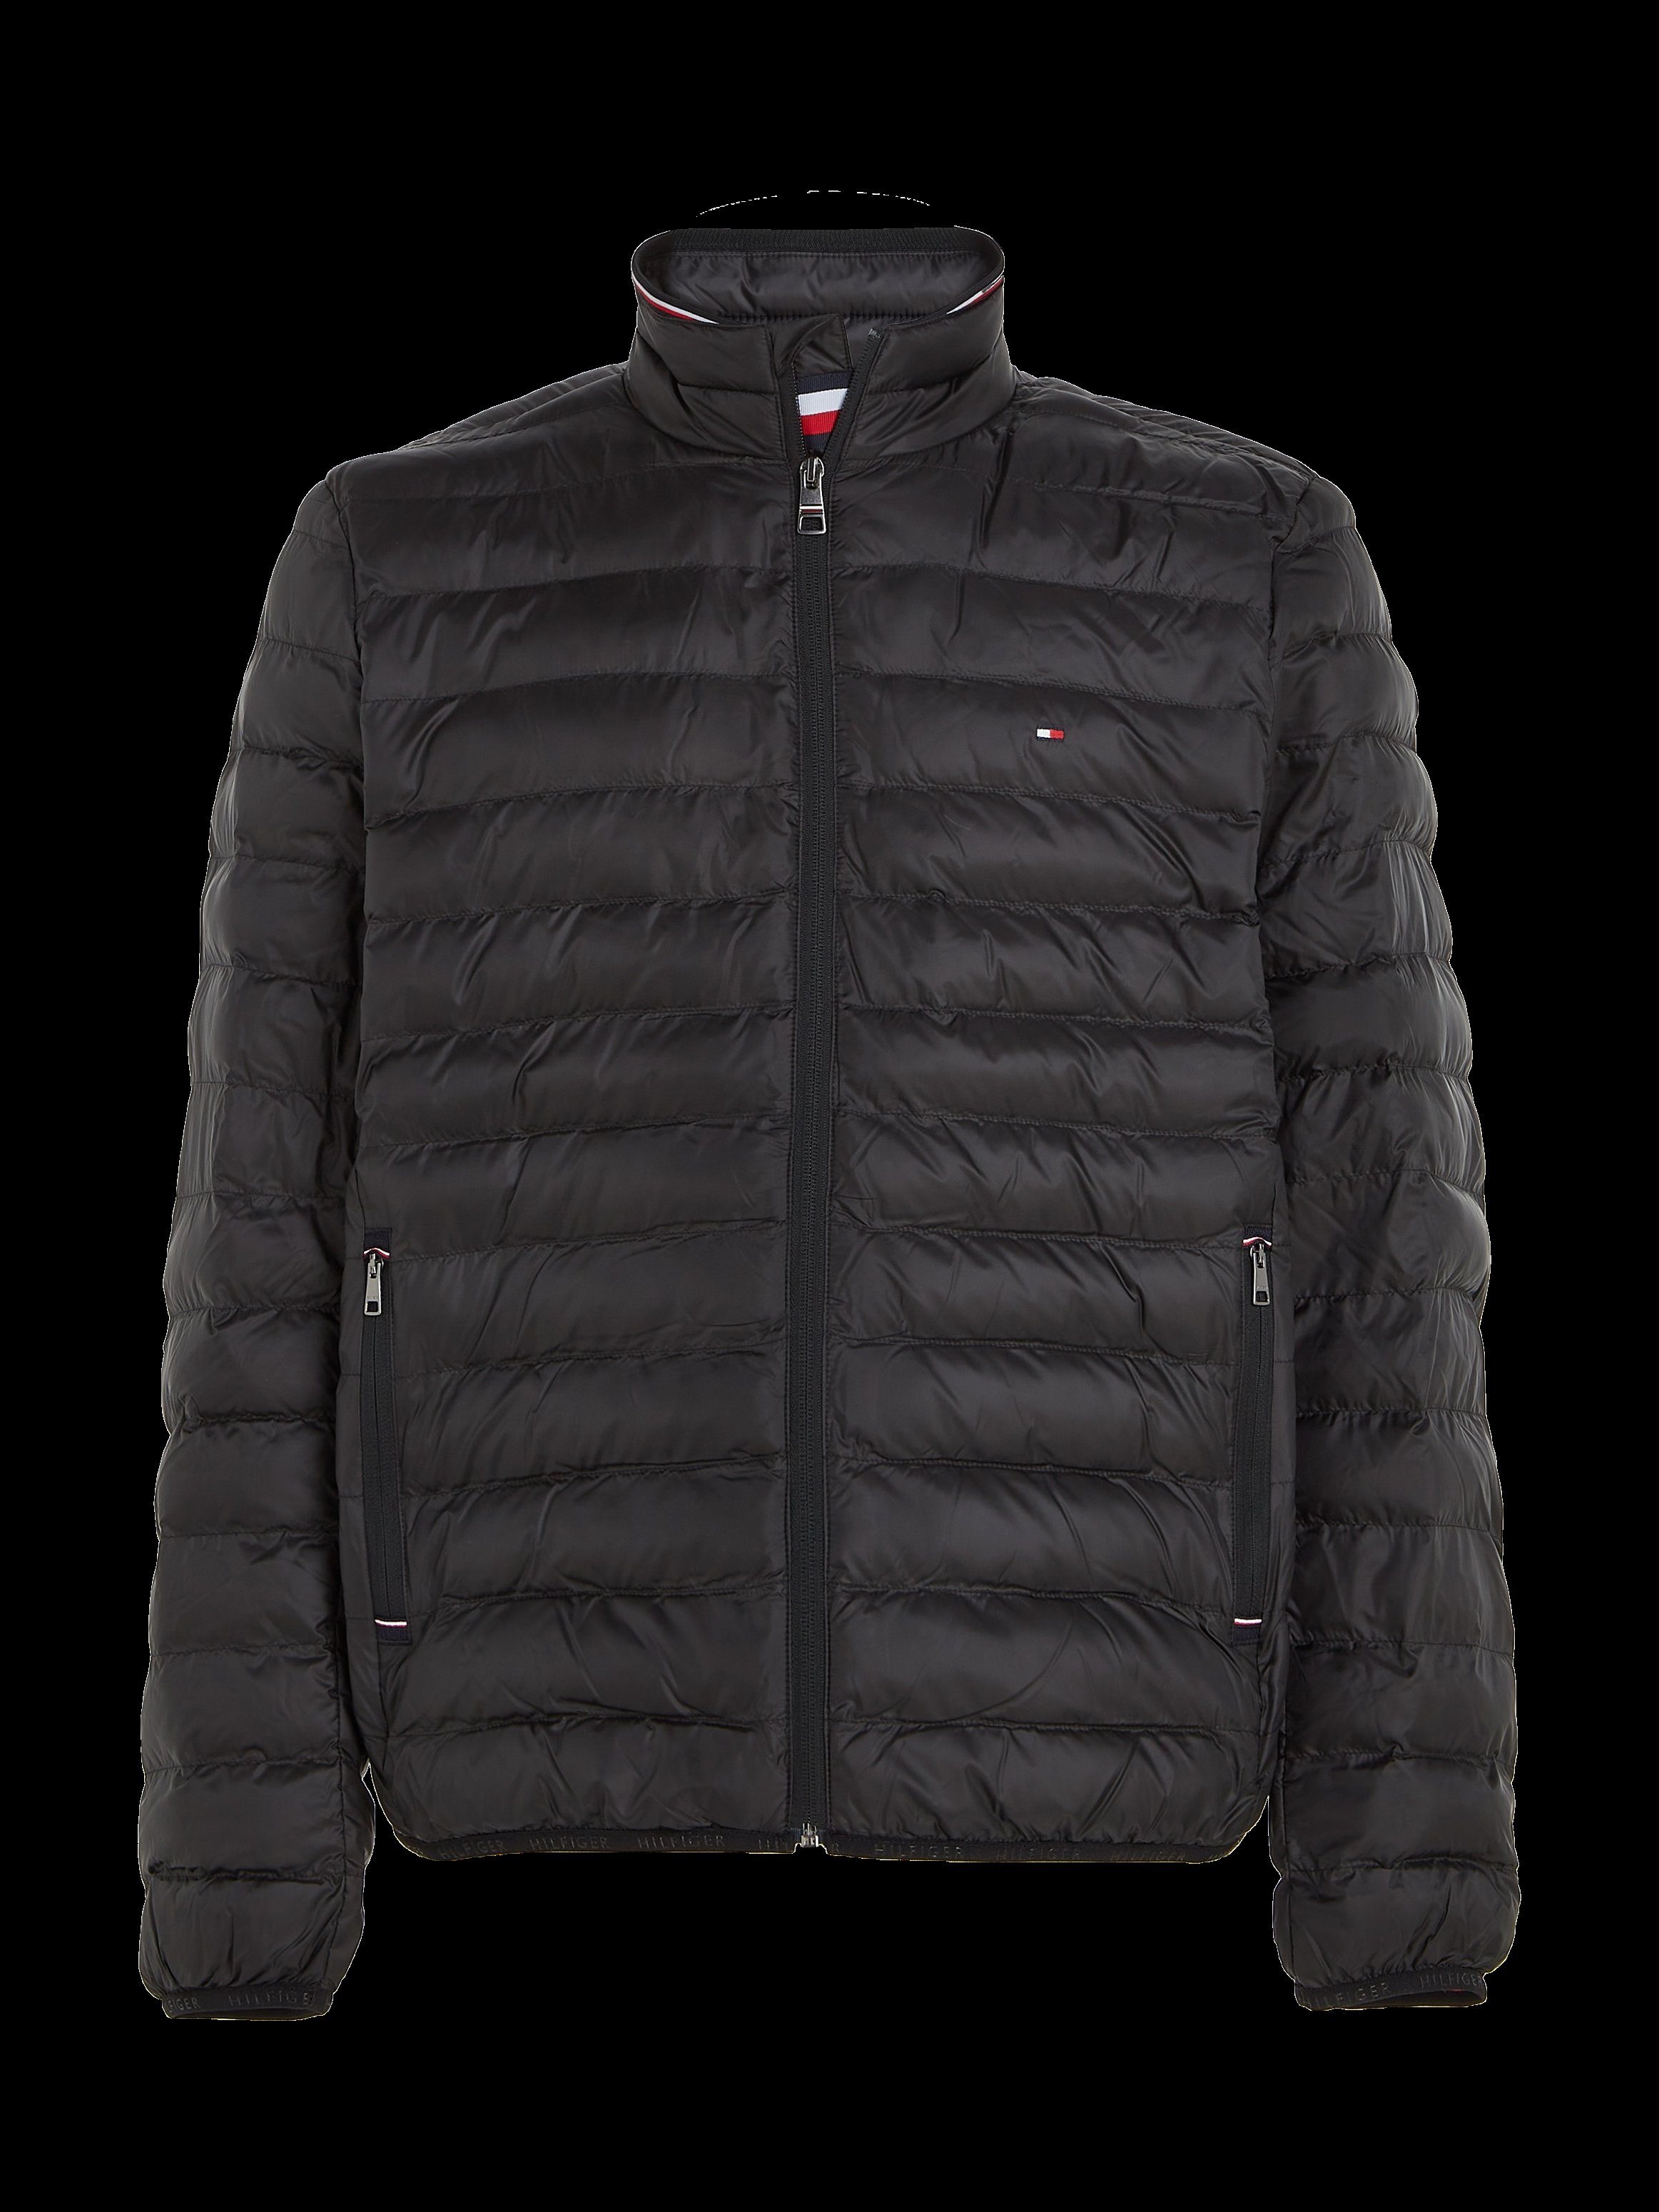 Tommy Hilfiger Steppjacke CORE black RECYCLED JACKET PACKABLE